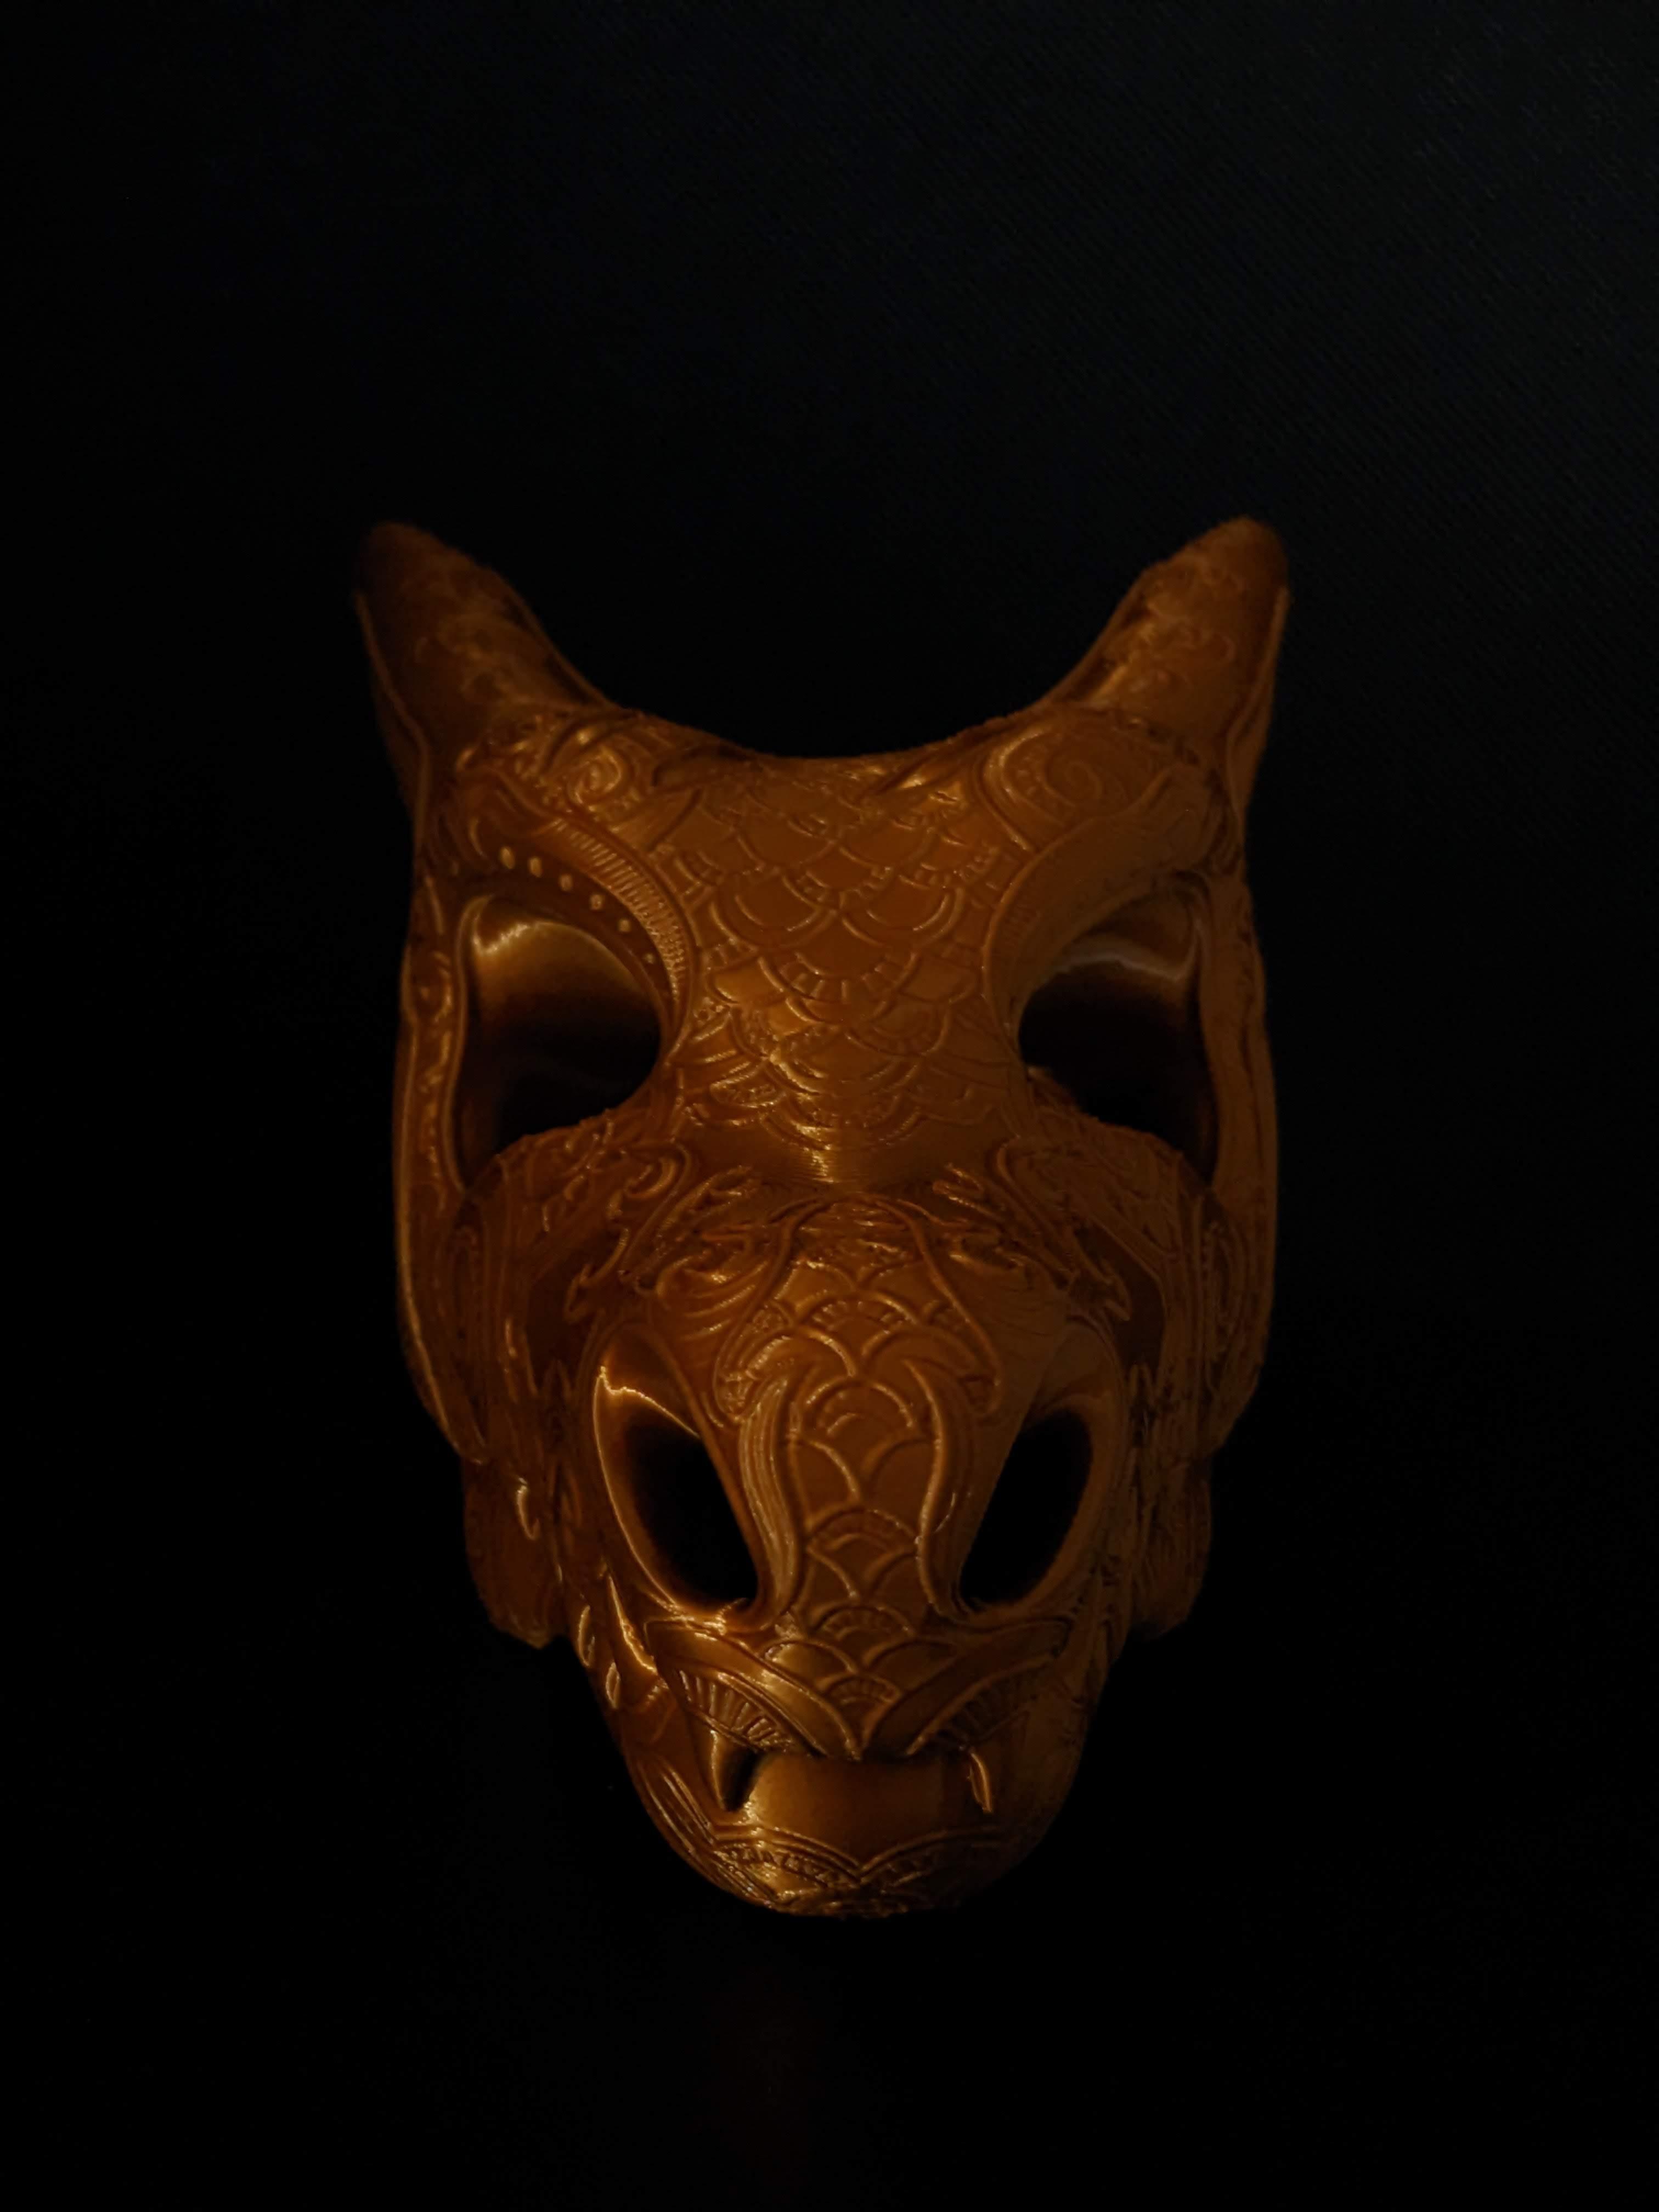 Ornate Charizard Skull (Pokémon) - Polymaker PolyLite PLA "Silk Bronze" with 0.15 LH and 15% infill. - 3d model